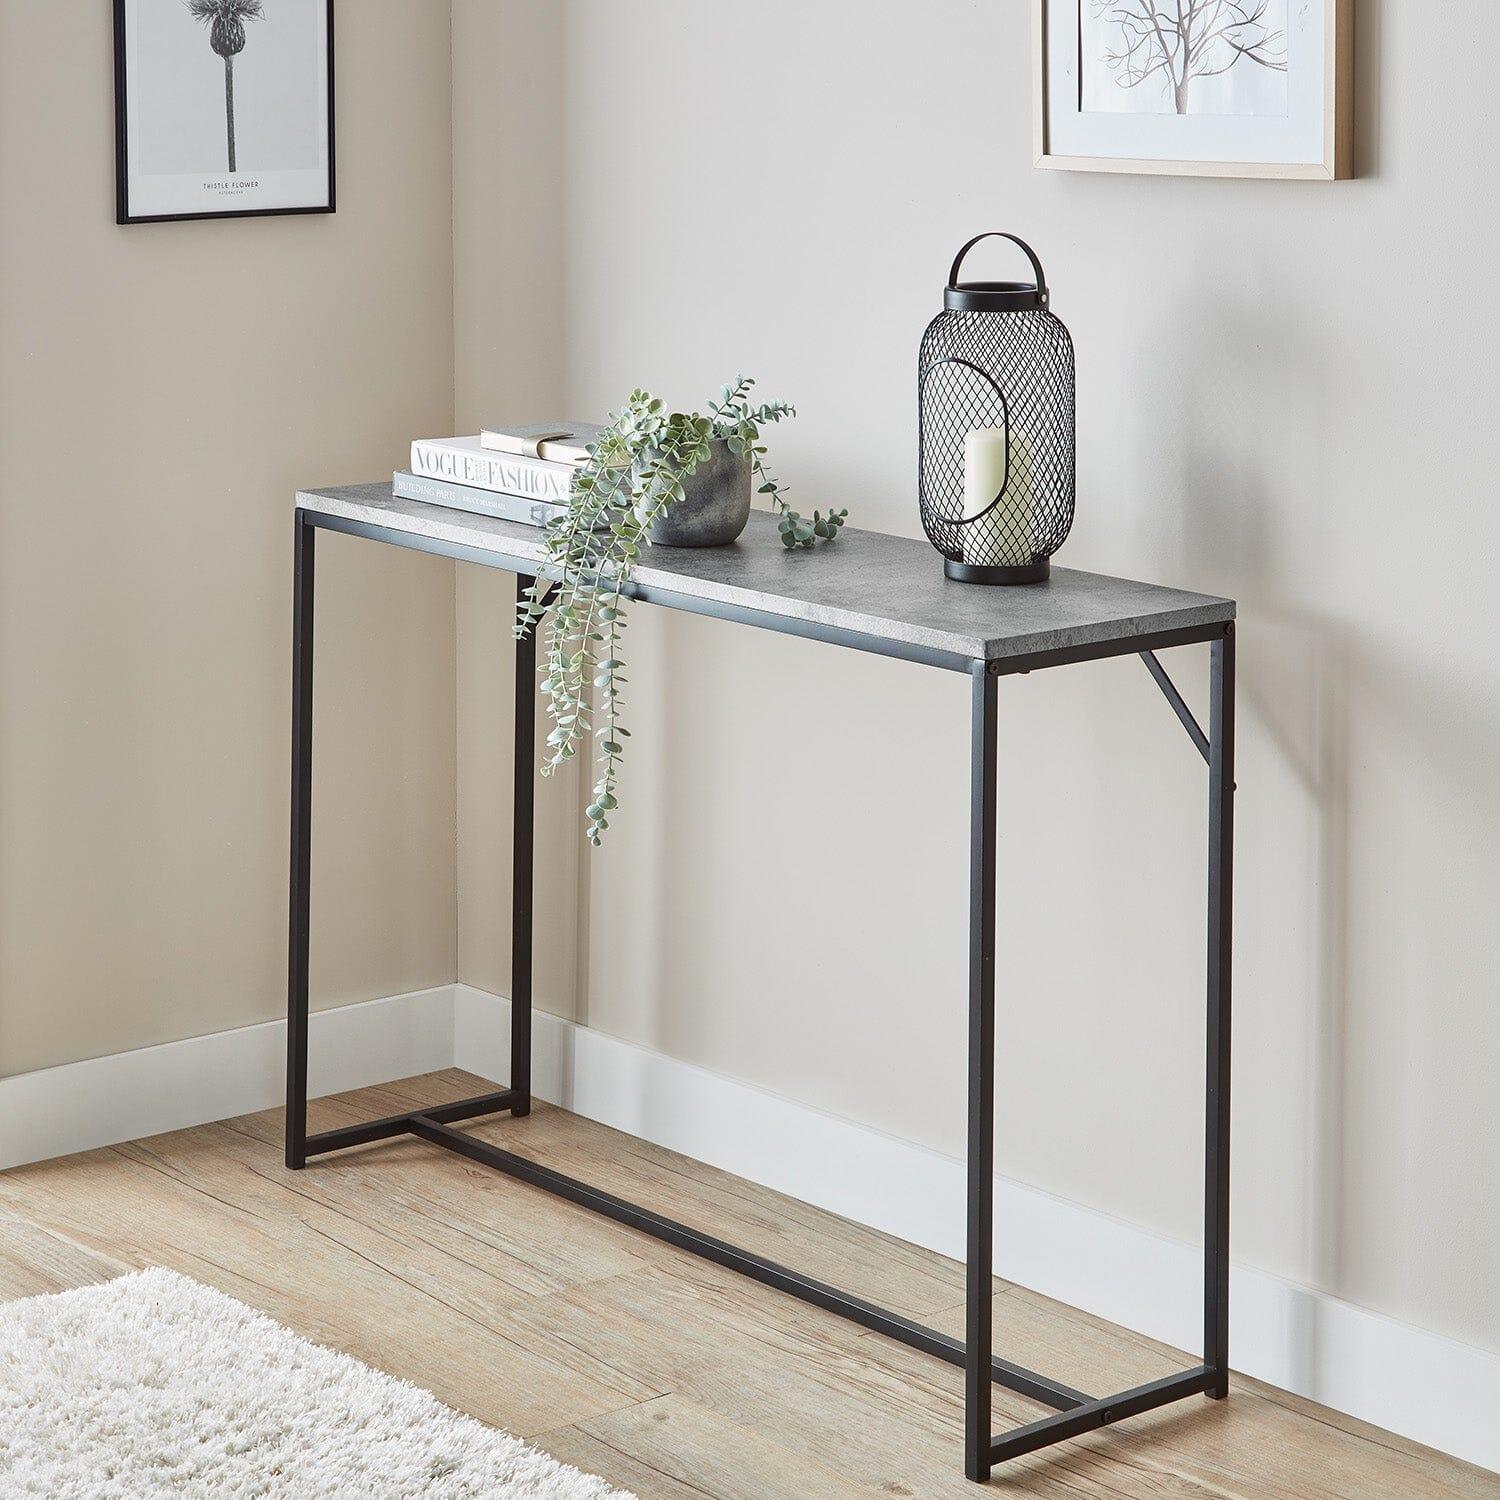 Outlet Jay console table - concrete effect and black